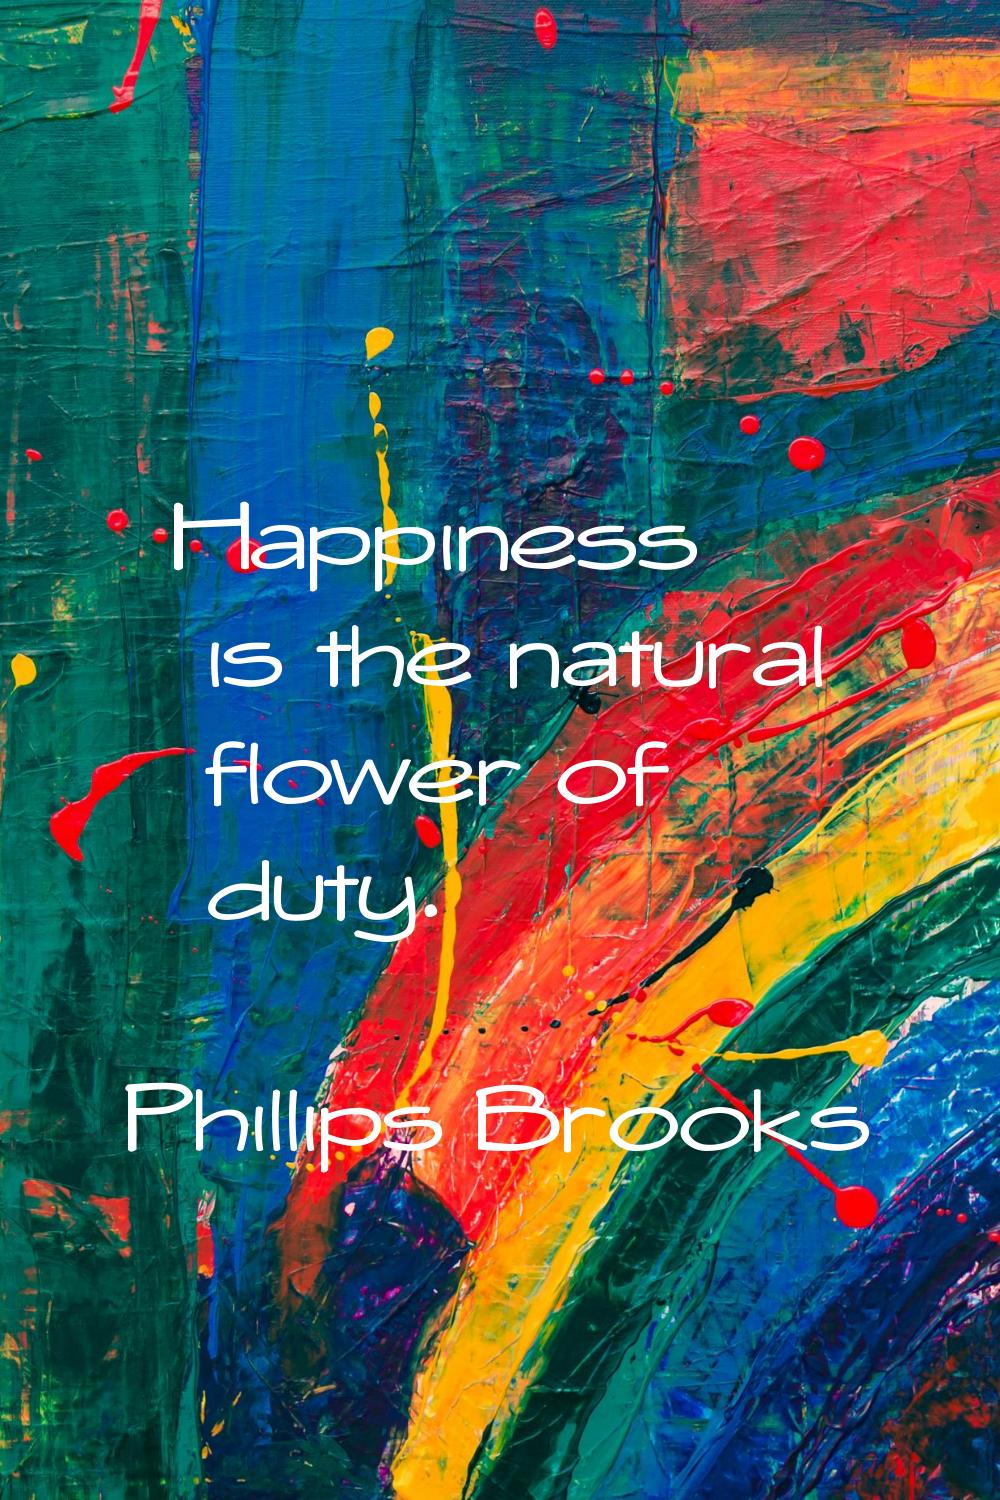 Happiness is the natural flower of duty.